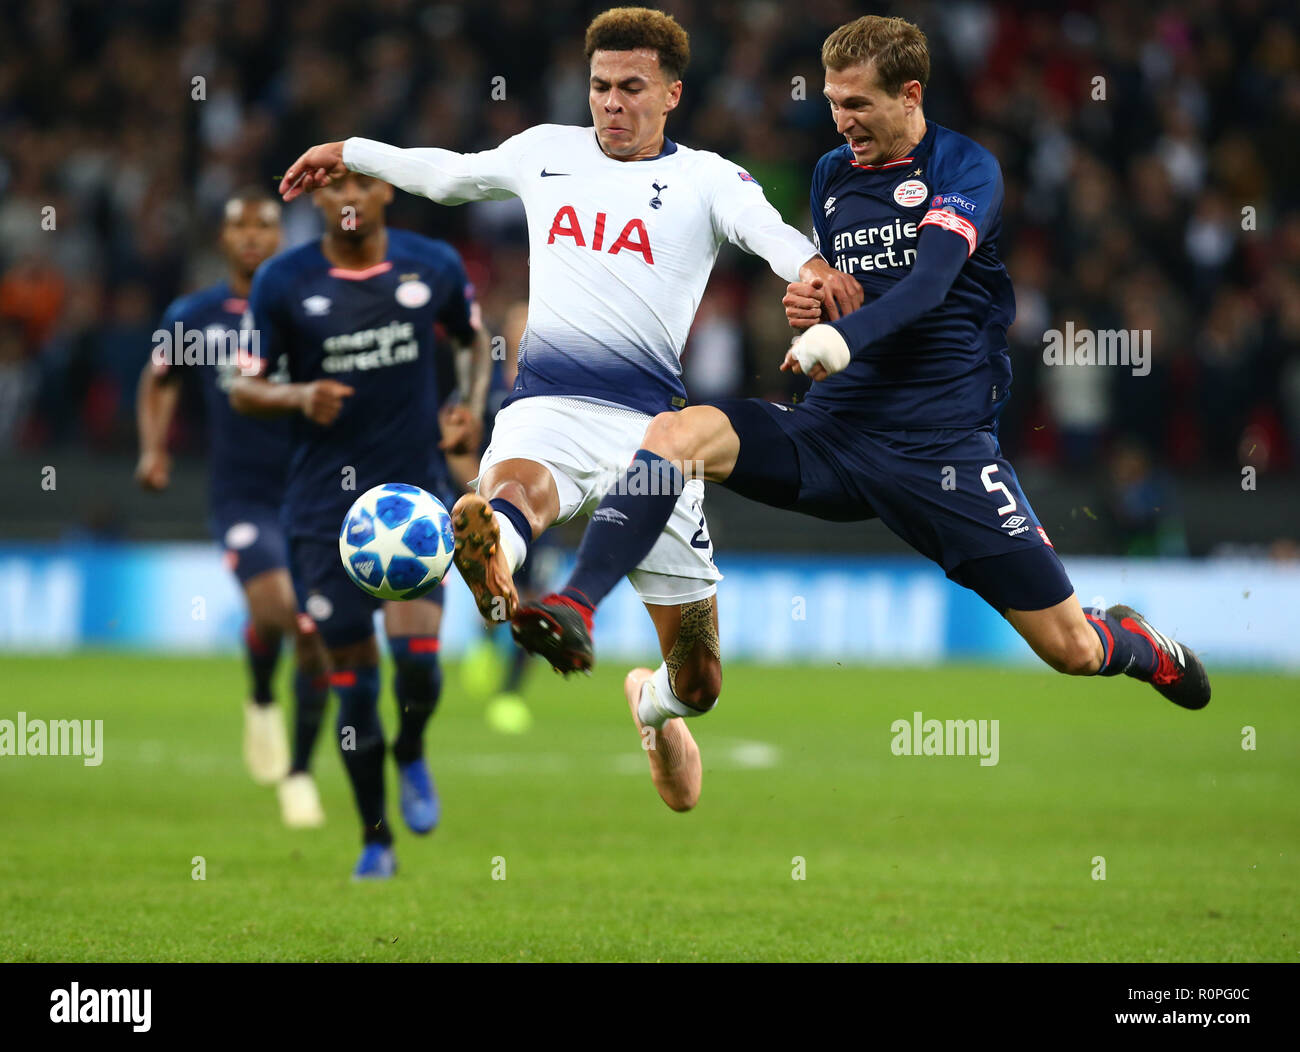 London, England, 06th November 2018.  L-R Tottenham Hotspur's Dele Alli and Daniel Schwaab of PSV Eindhoven  during Champion League Group B between Tottenham Hotspur and PSV Eindhoven at Wembley stadium , London, England on 06 Nov 2018. Credit Action Foto Sport  FA Premier League and Football League images are subject to DataCo Licence. Editorial use ONLY. No print sales. No personal use sales. NO UNPAID USE Credit: Action Foto Sport/Alamy Live News Stock Photo